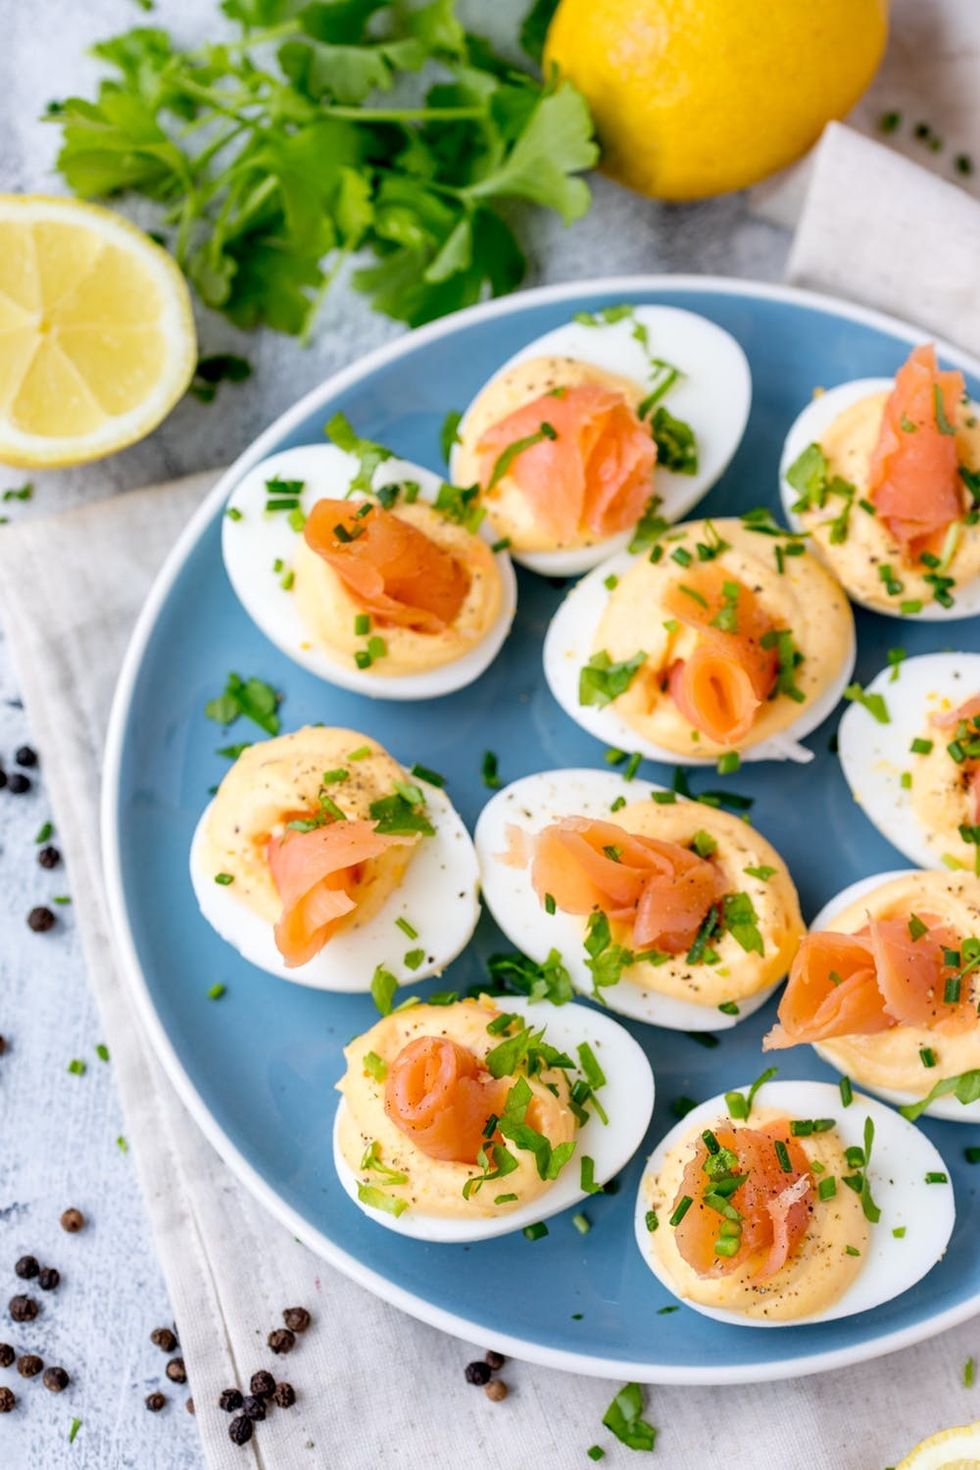 Posh-up Those Boiled Eggs With Our Smoked Salmon Devilled Eggs Recipe!